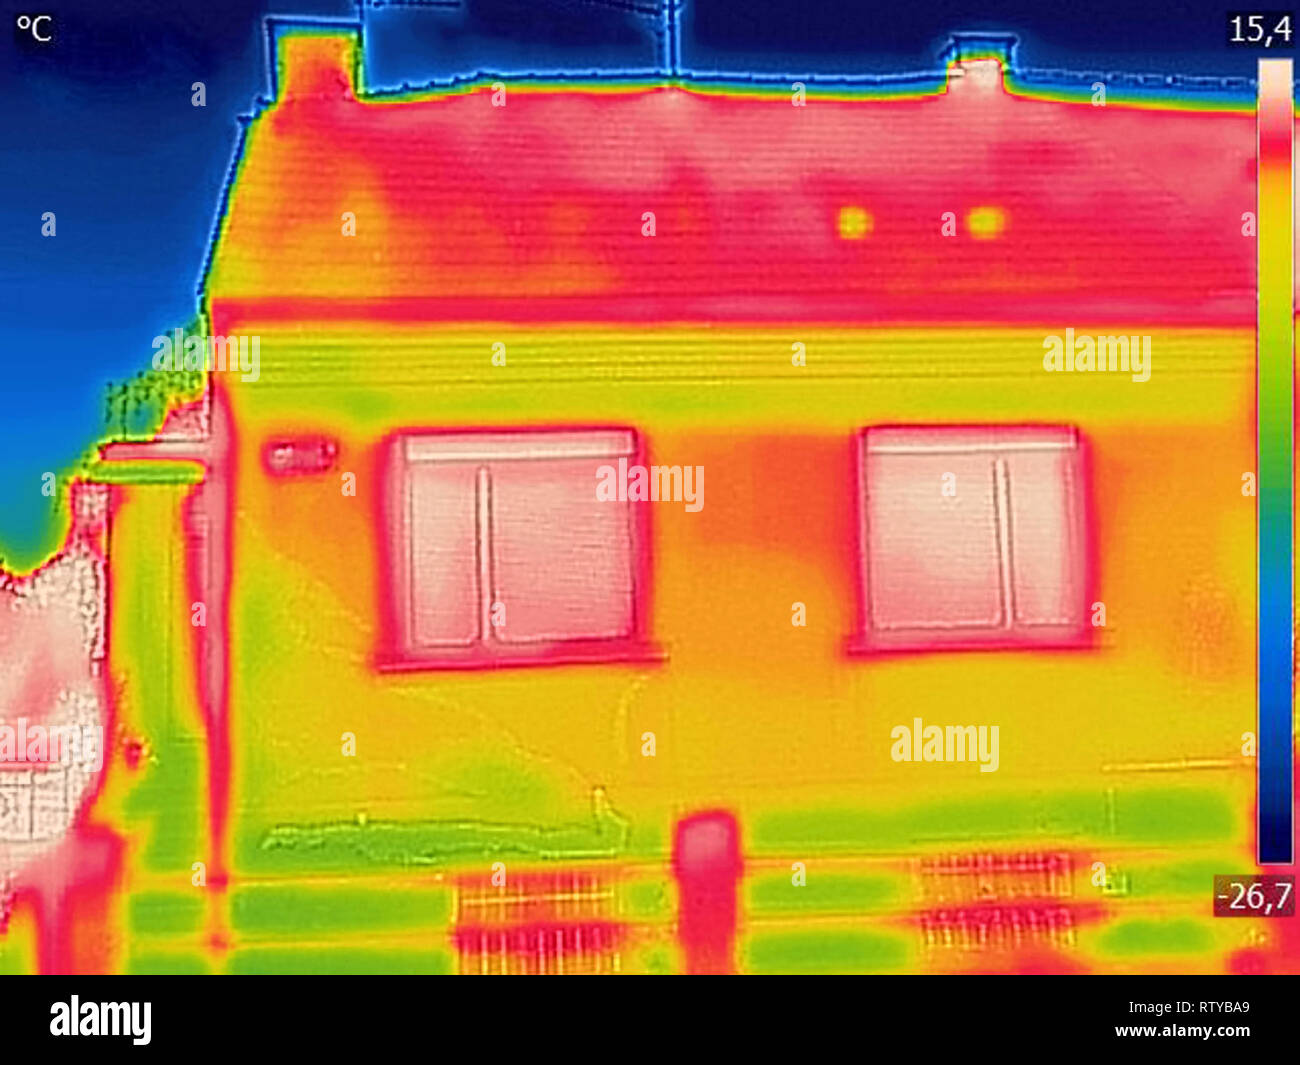 https://c8.alamy.com/comp/RTYBA9/detecting-heat-loss-outside-building-using-thermal-camera-RTYBA9.jpg